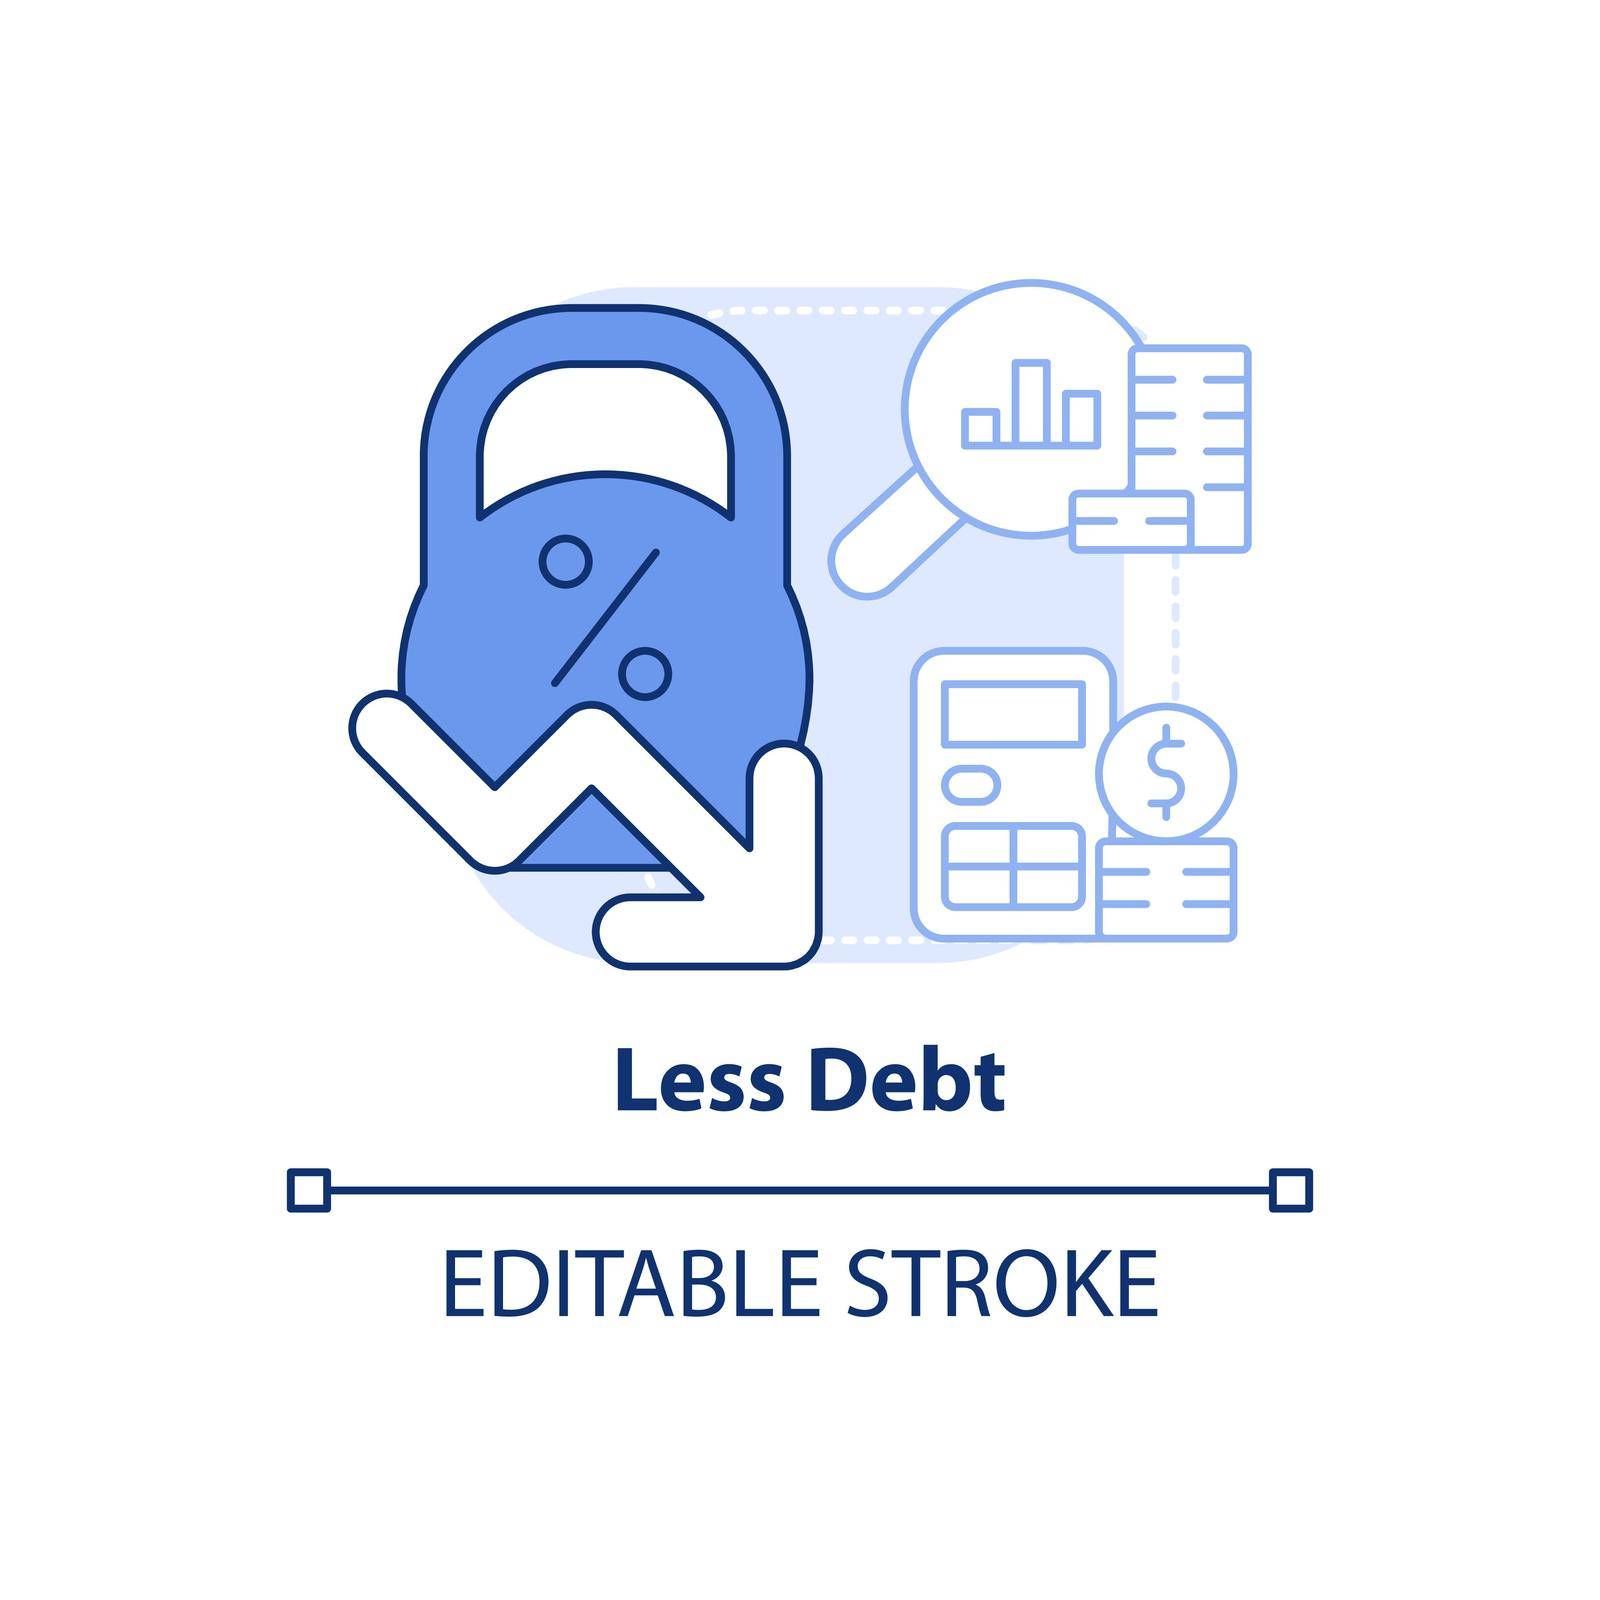 Less debt light blue concept icon by bsd